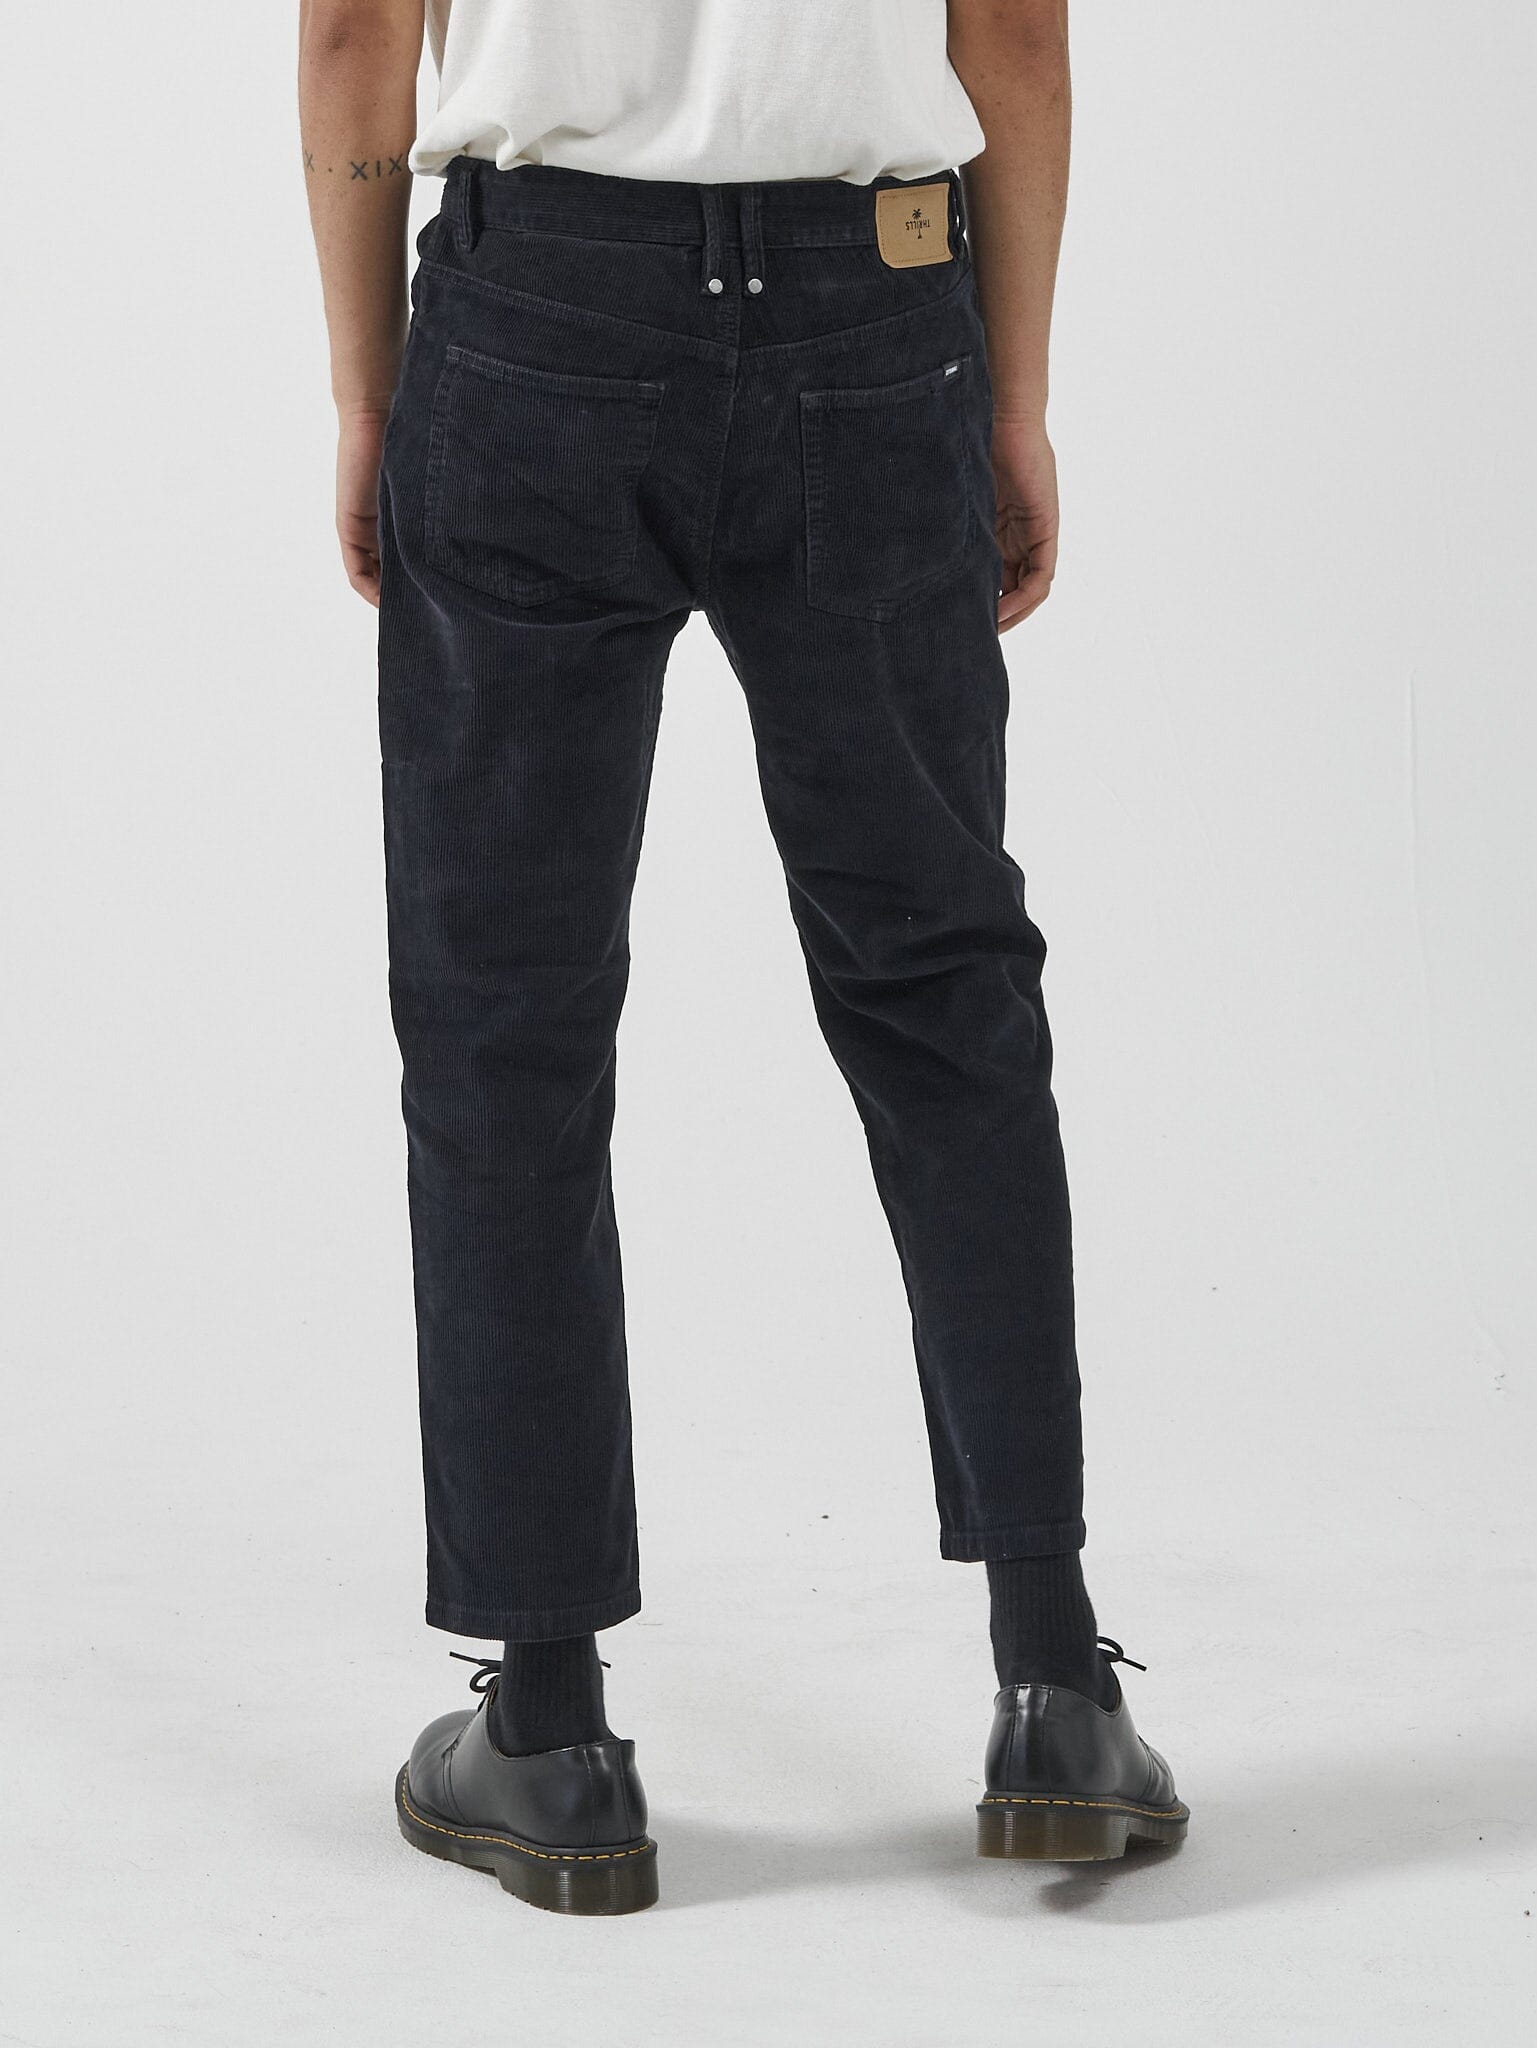 Cotton On relaxed pants in black corduroy | ASOS